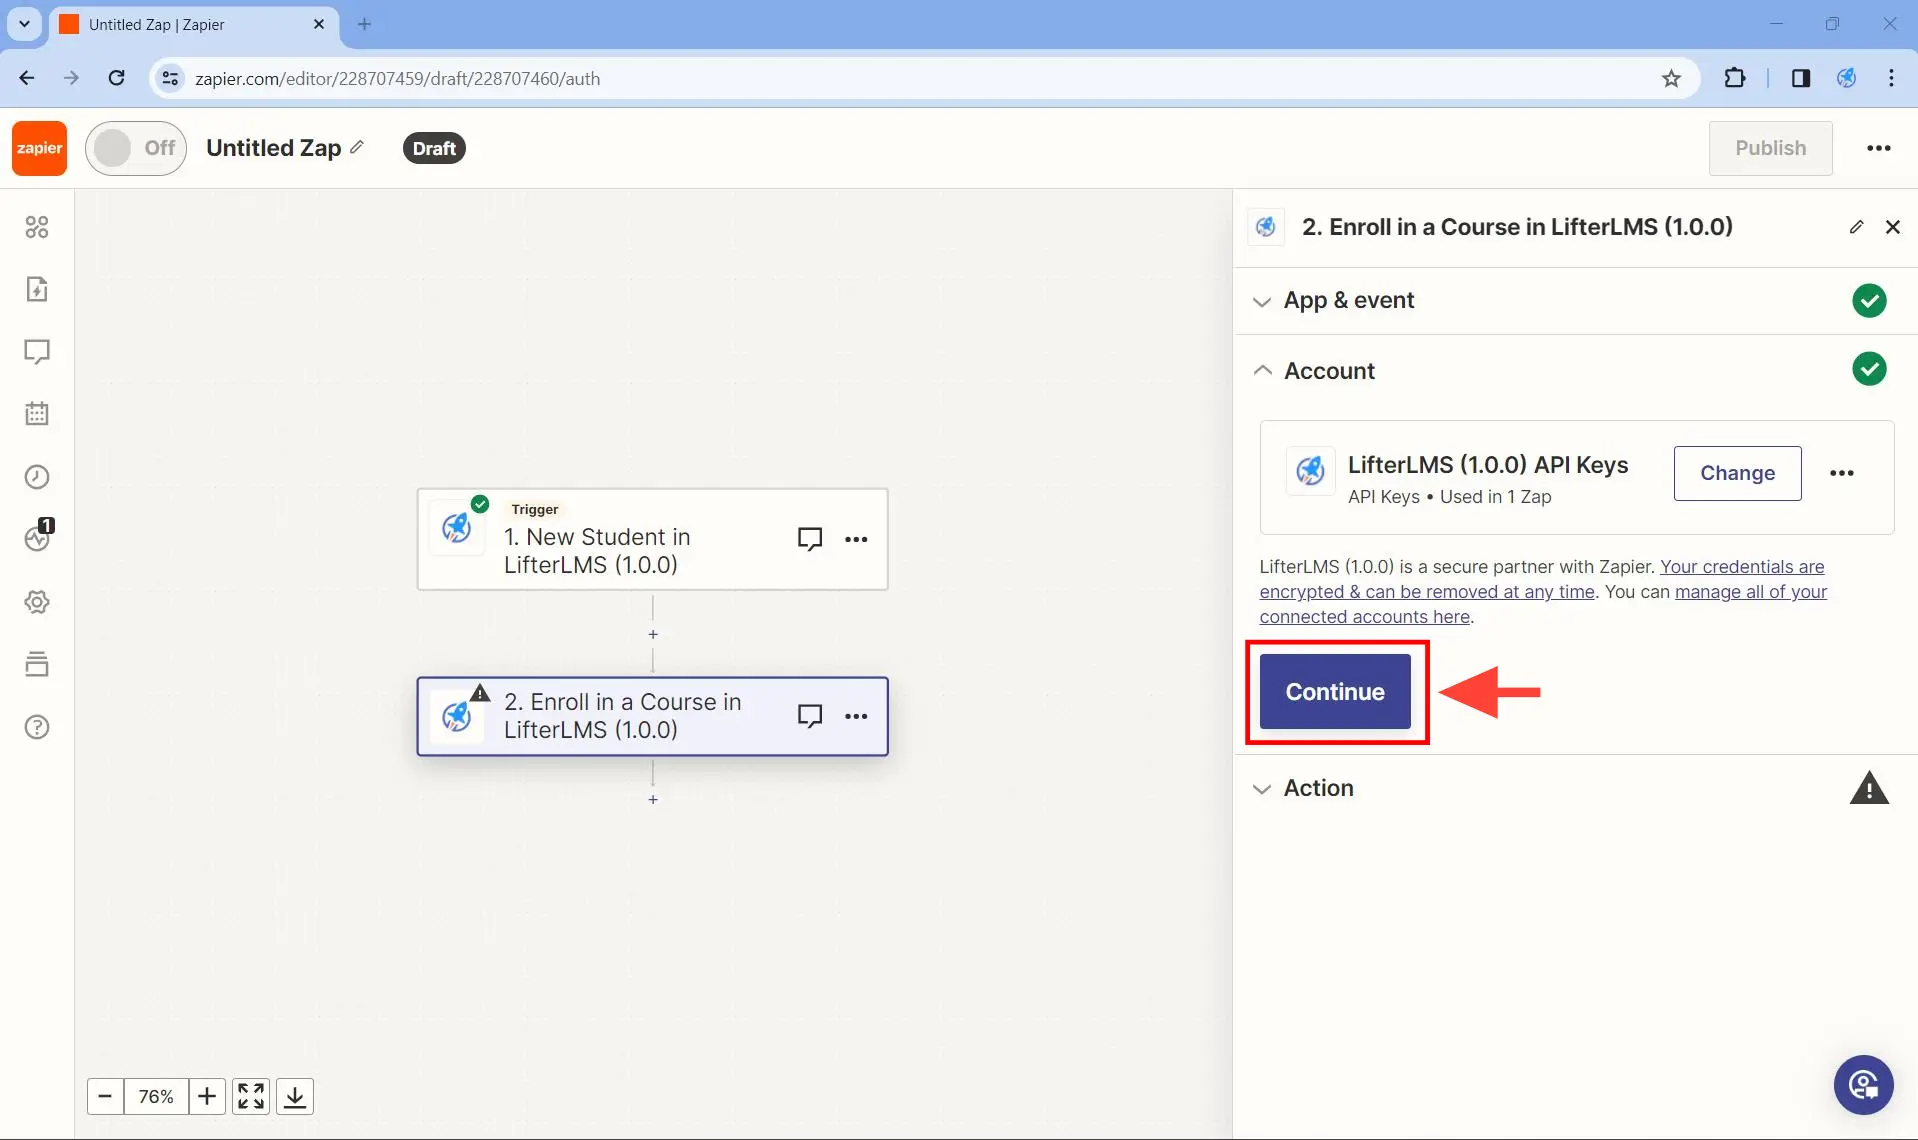 Set up at least one action - Step 4. Under Account Connect LifterLMS (1.0.0) click on Continue.